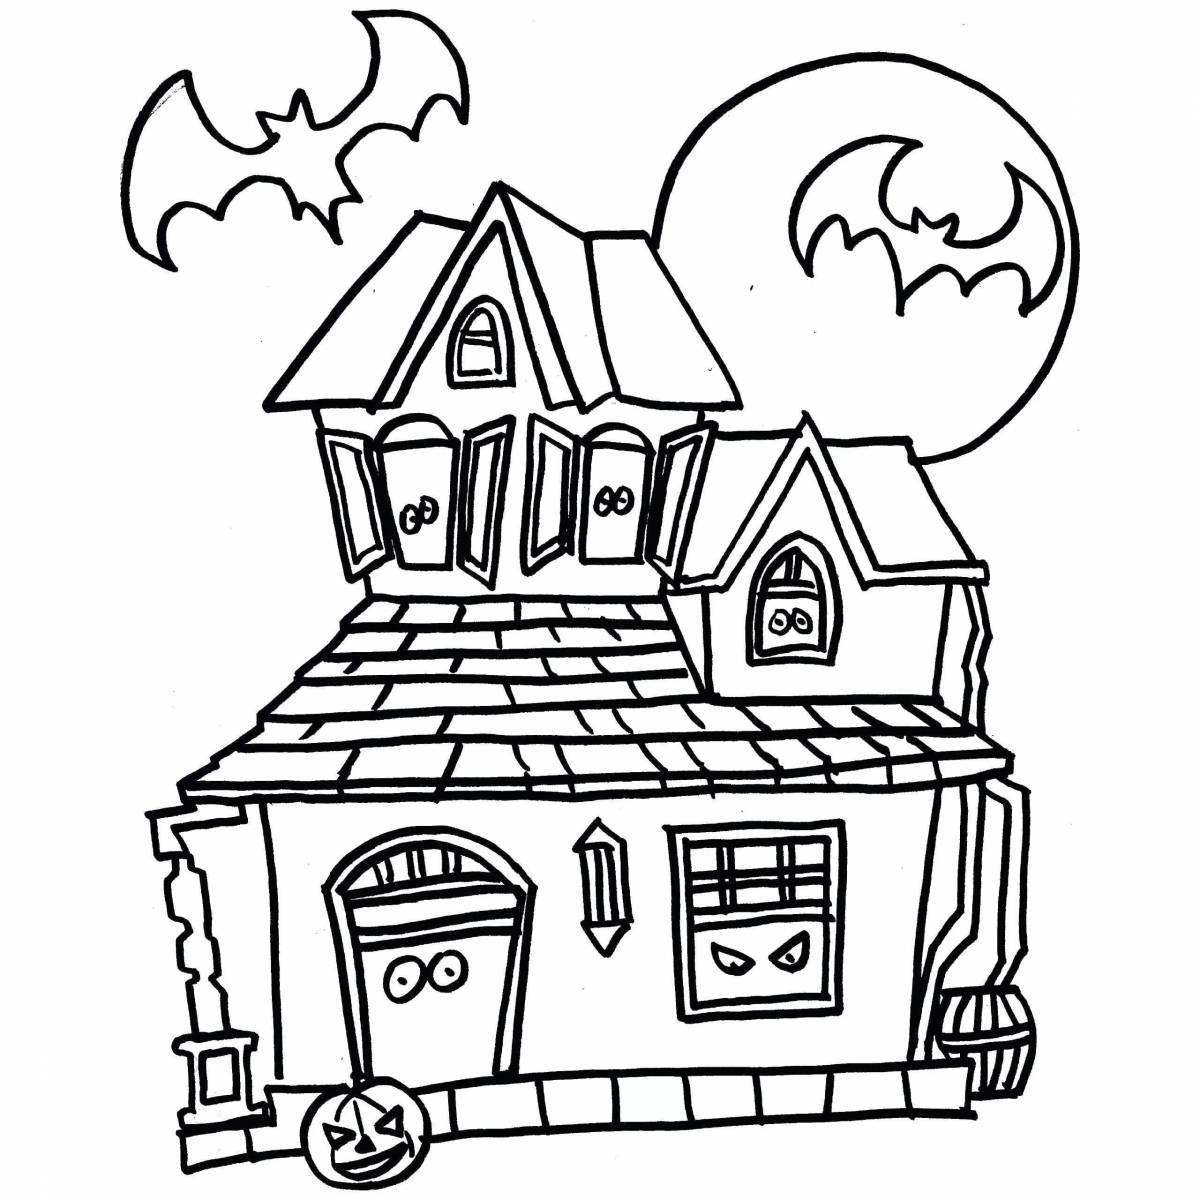 Glamorous house coloring book for kids